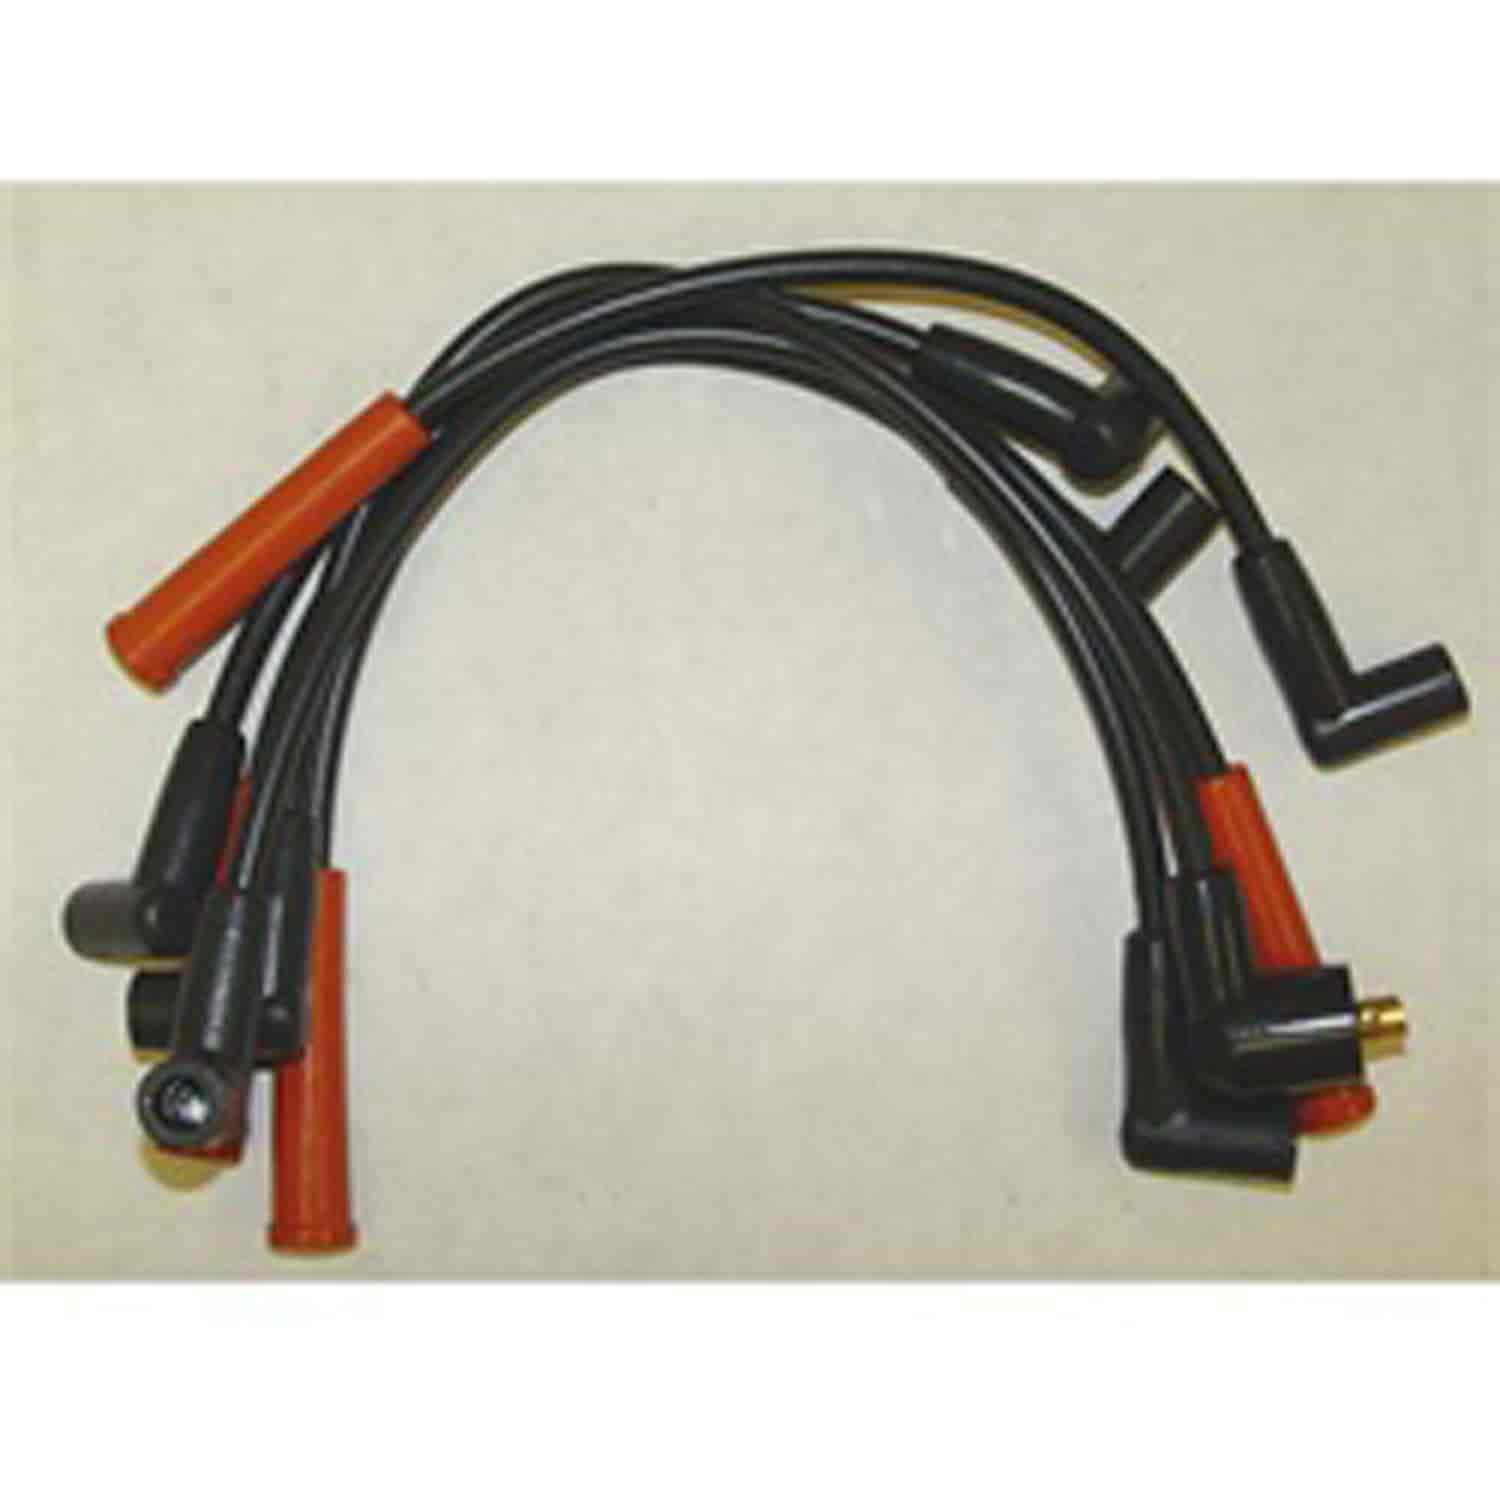 This ignition wire set from Omix-ADA fits the 2.4L engine in 03-06 Jeep Wranglers & 2.5L engine in 9